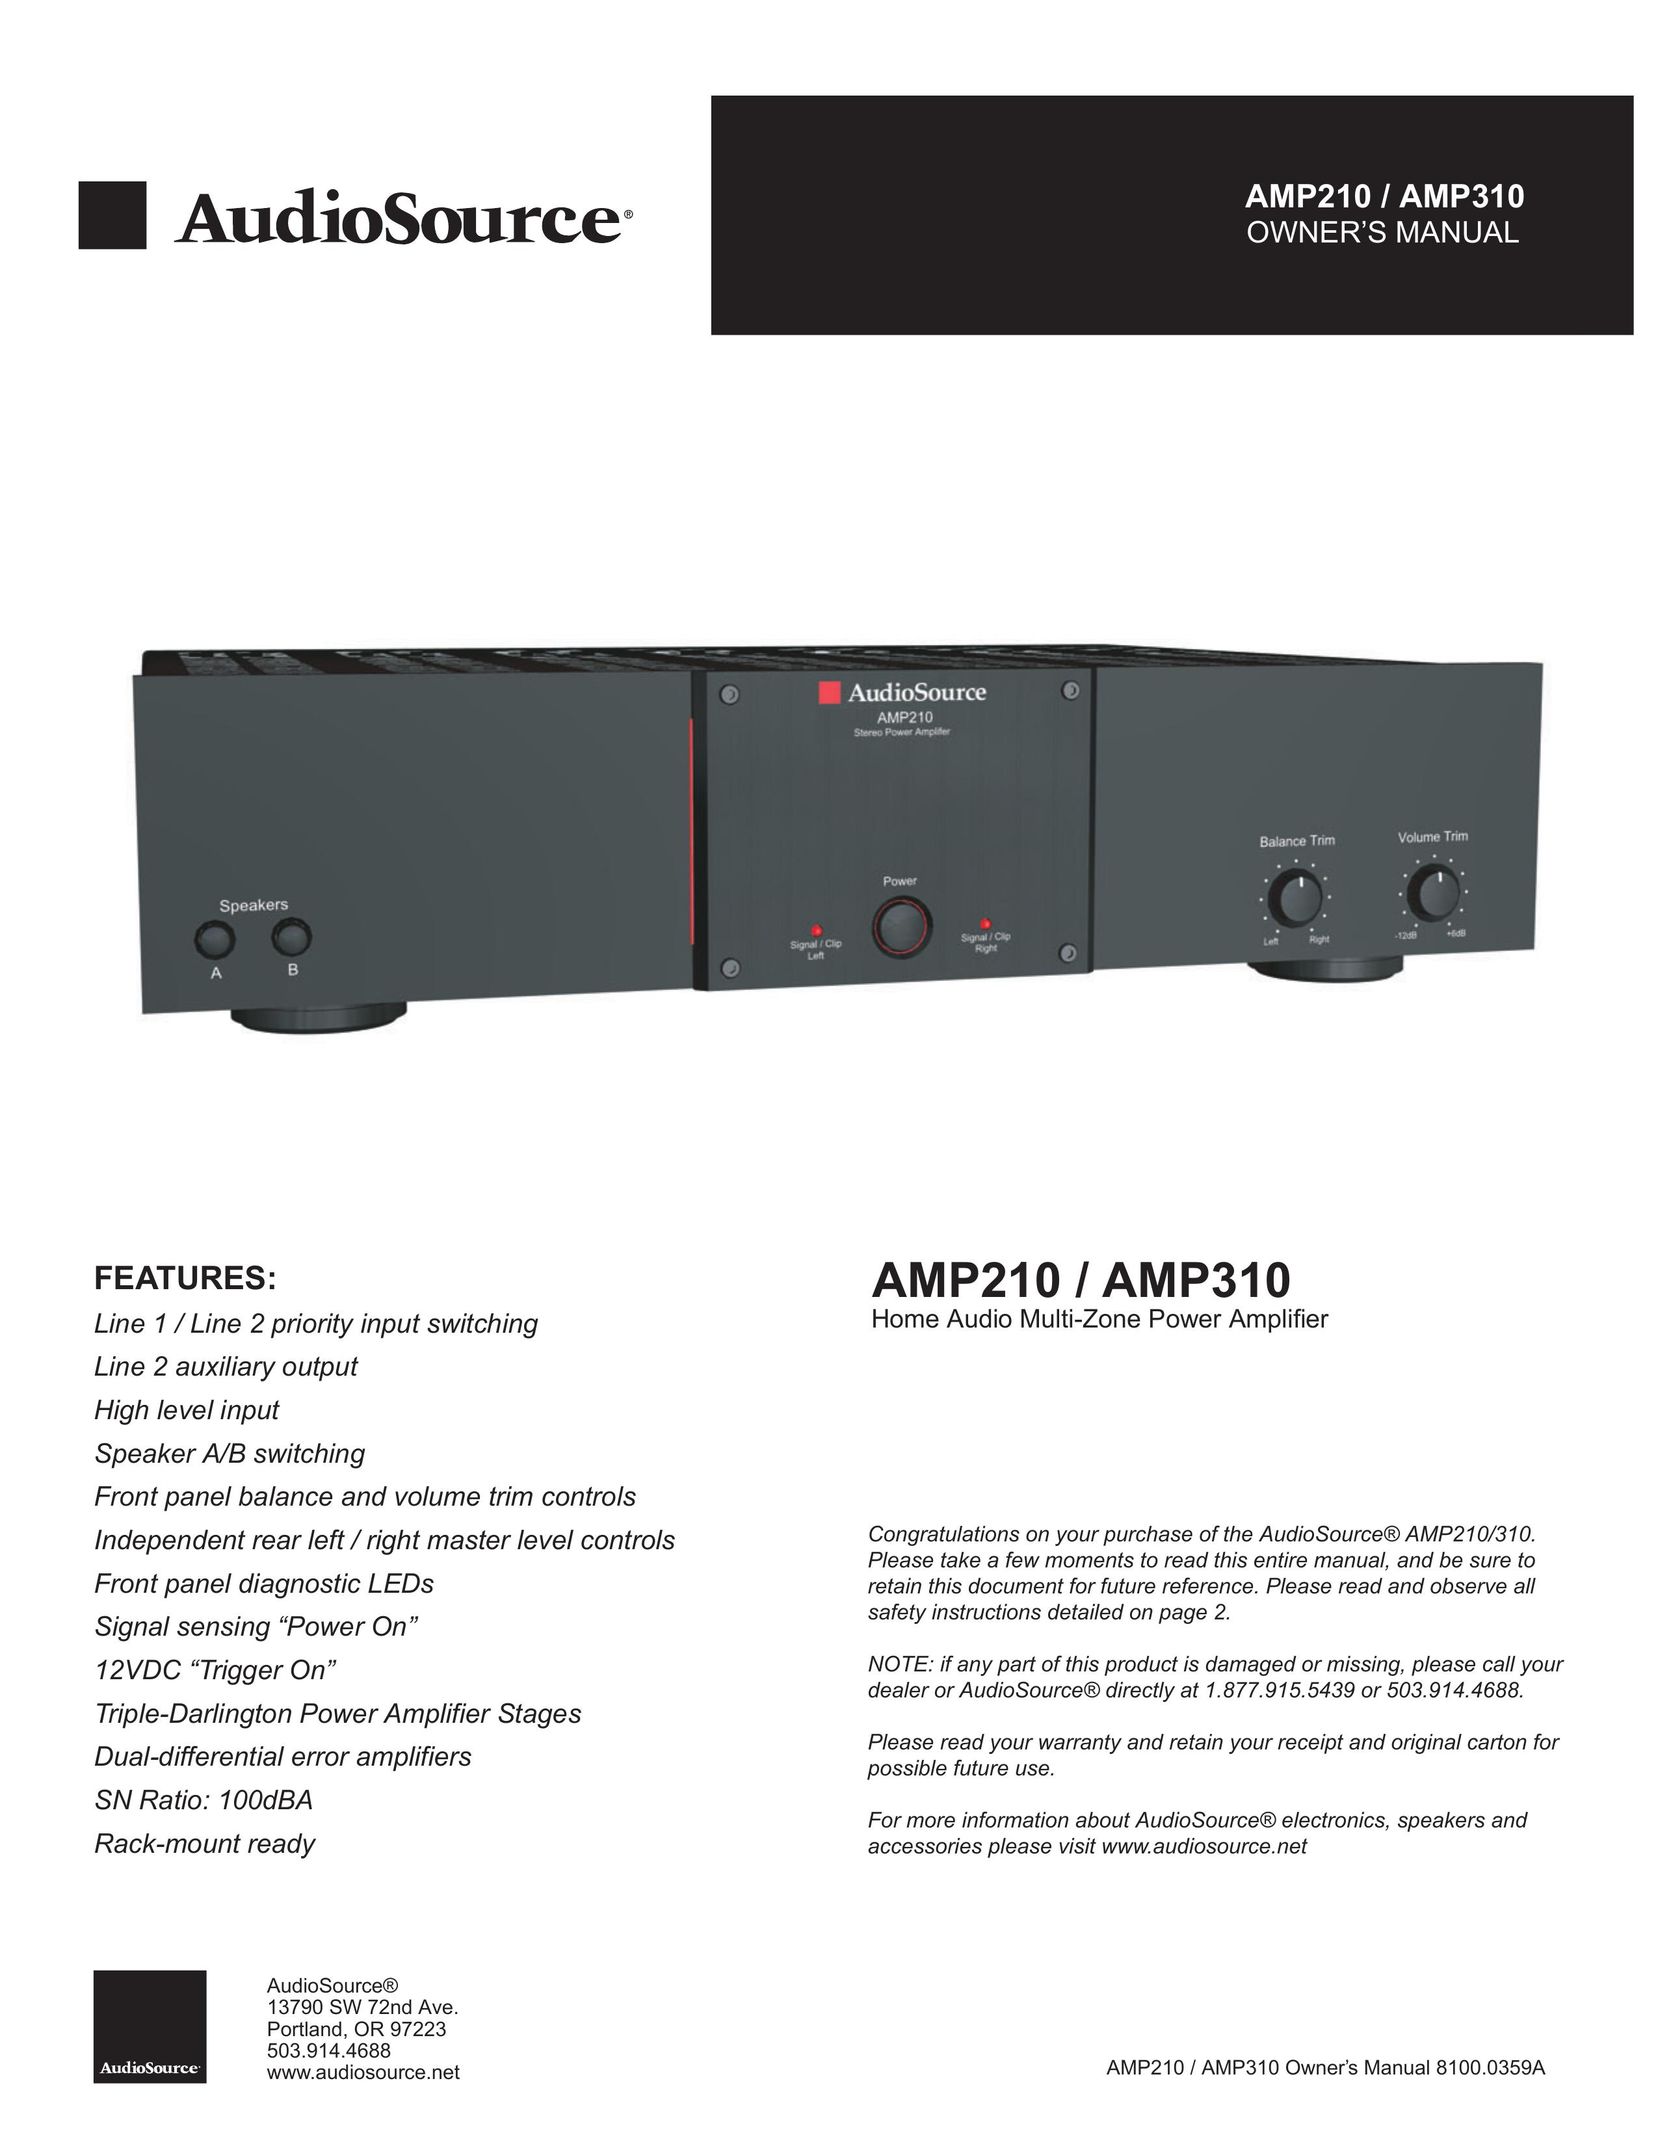 AudioSource AMP210 Stereo Amplifier User Manual